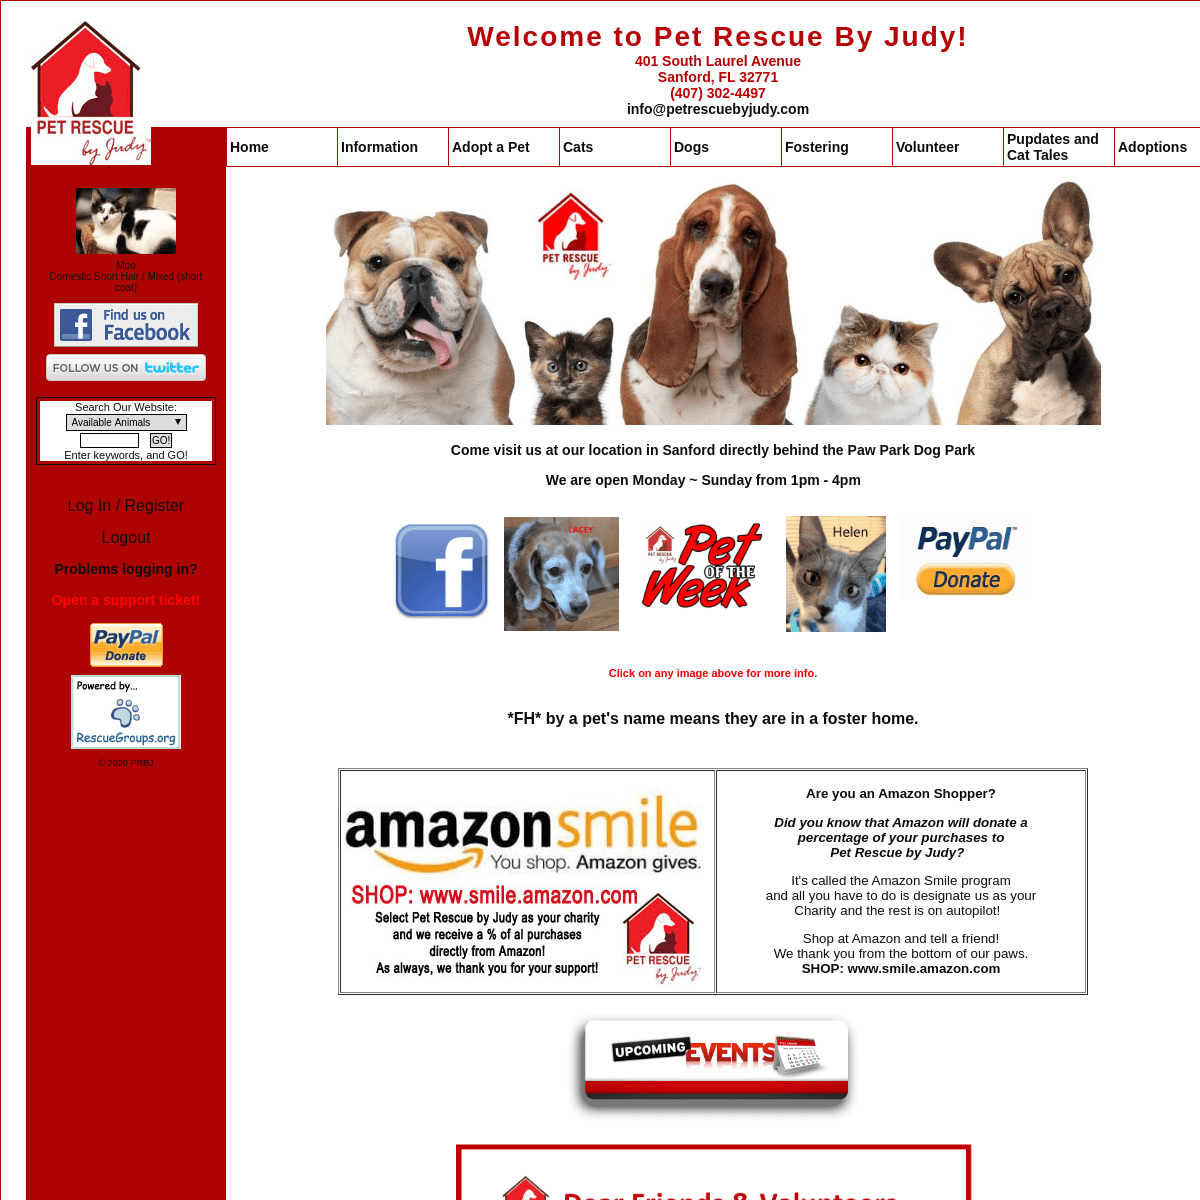 A complete backup of petrescuebyjudy.com